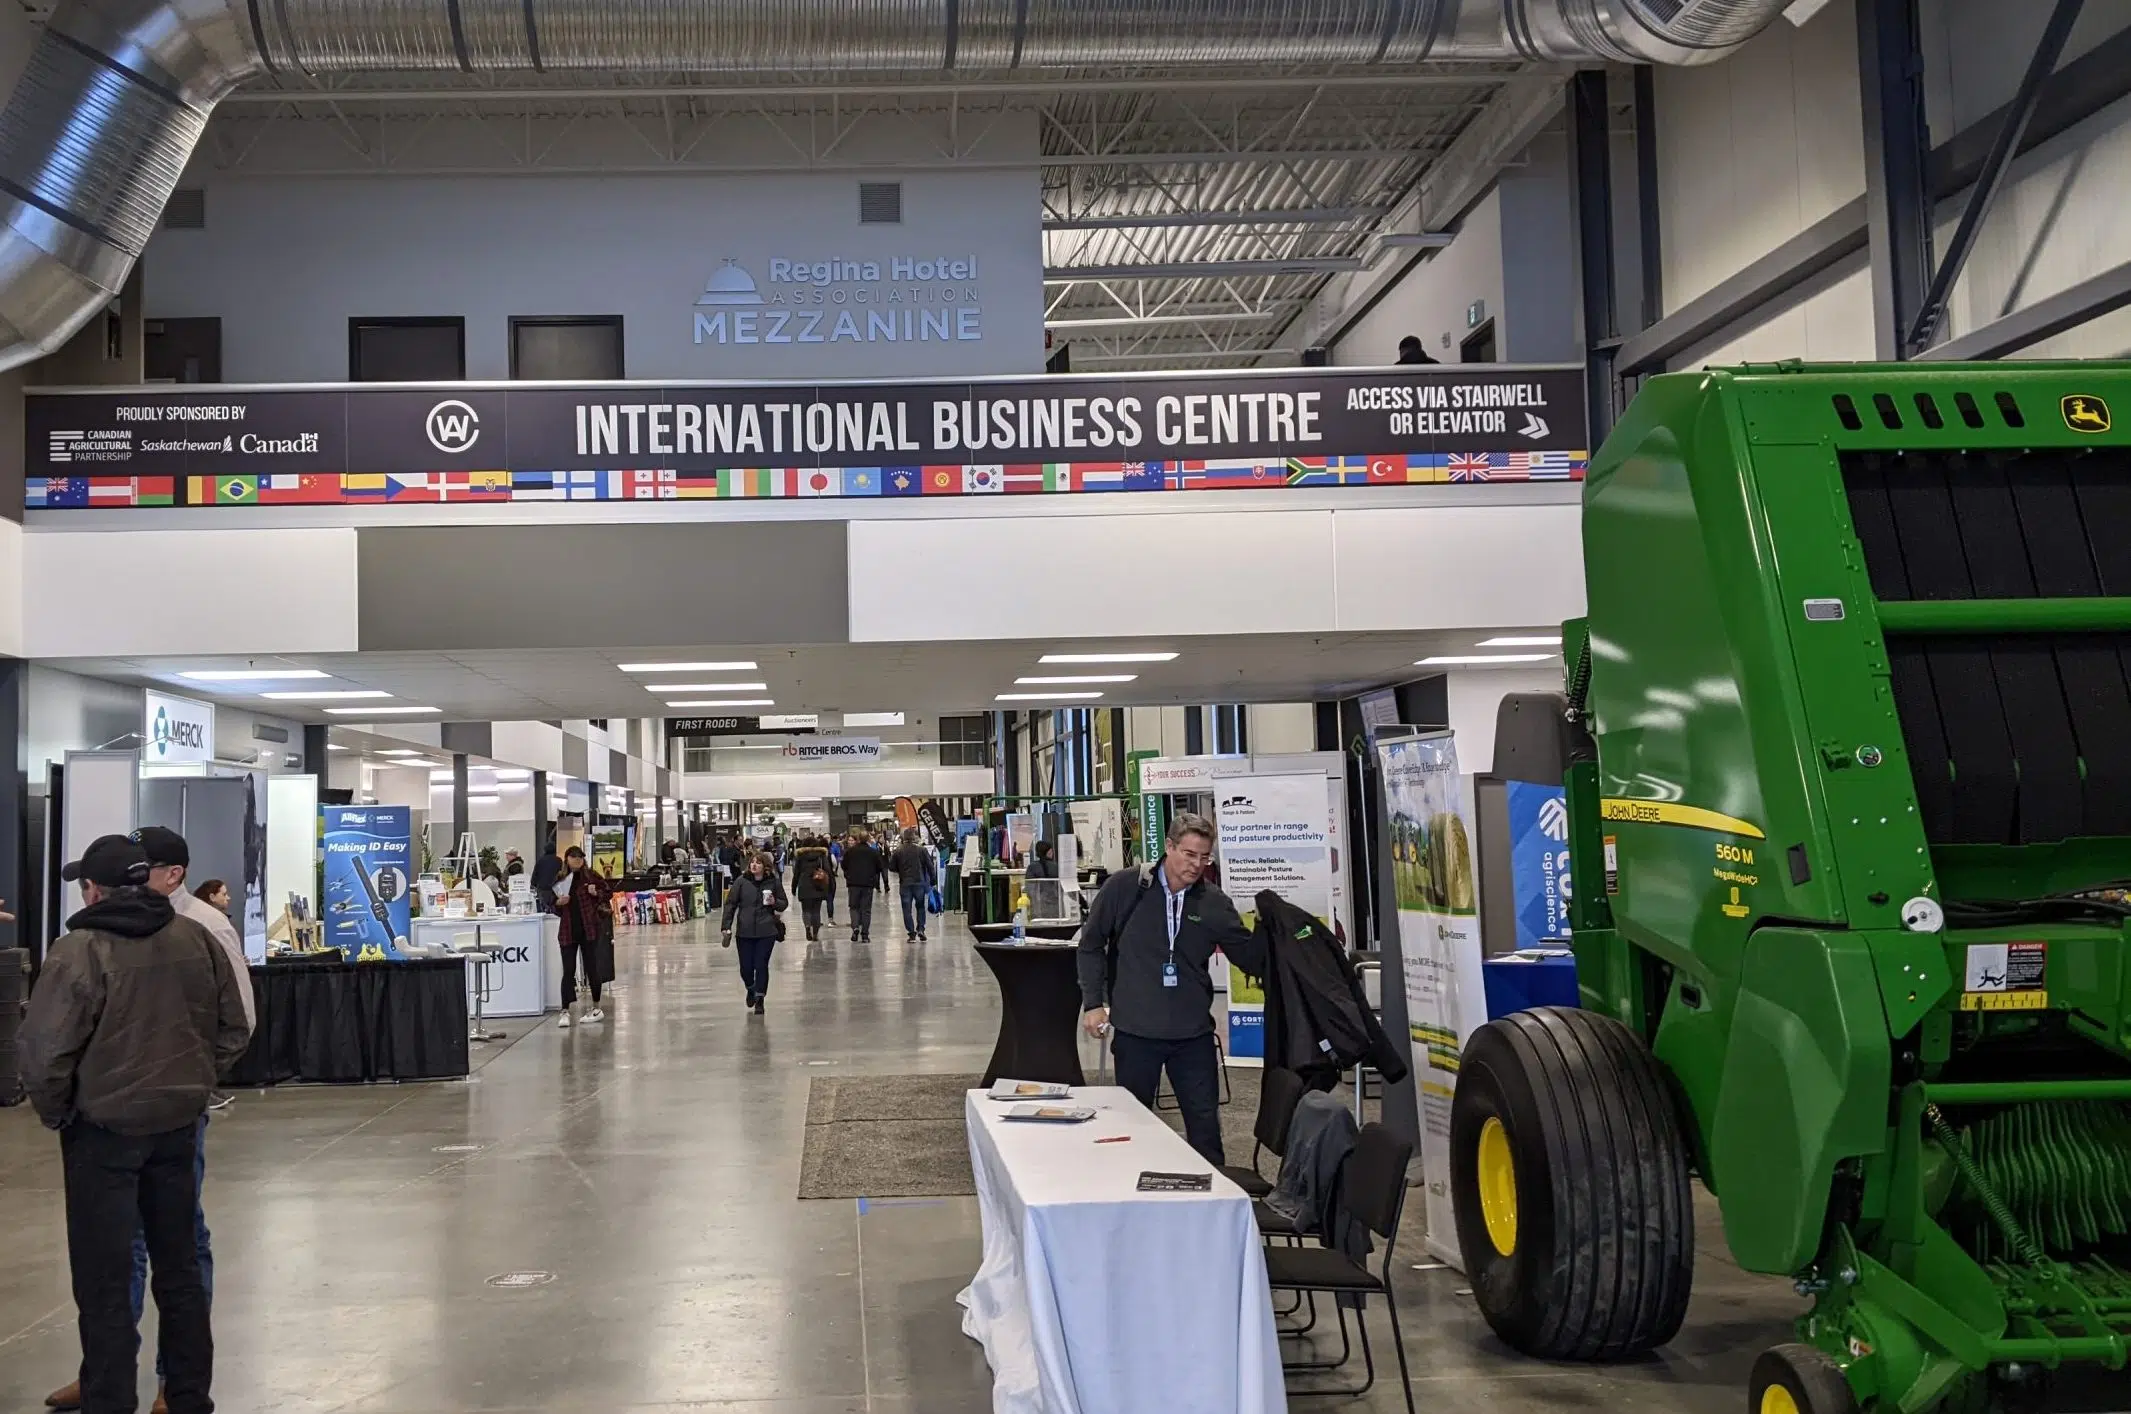 Day 4 of Agribition welcomes 500 displaced Ukrainians